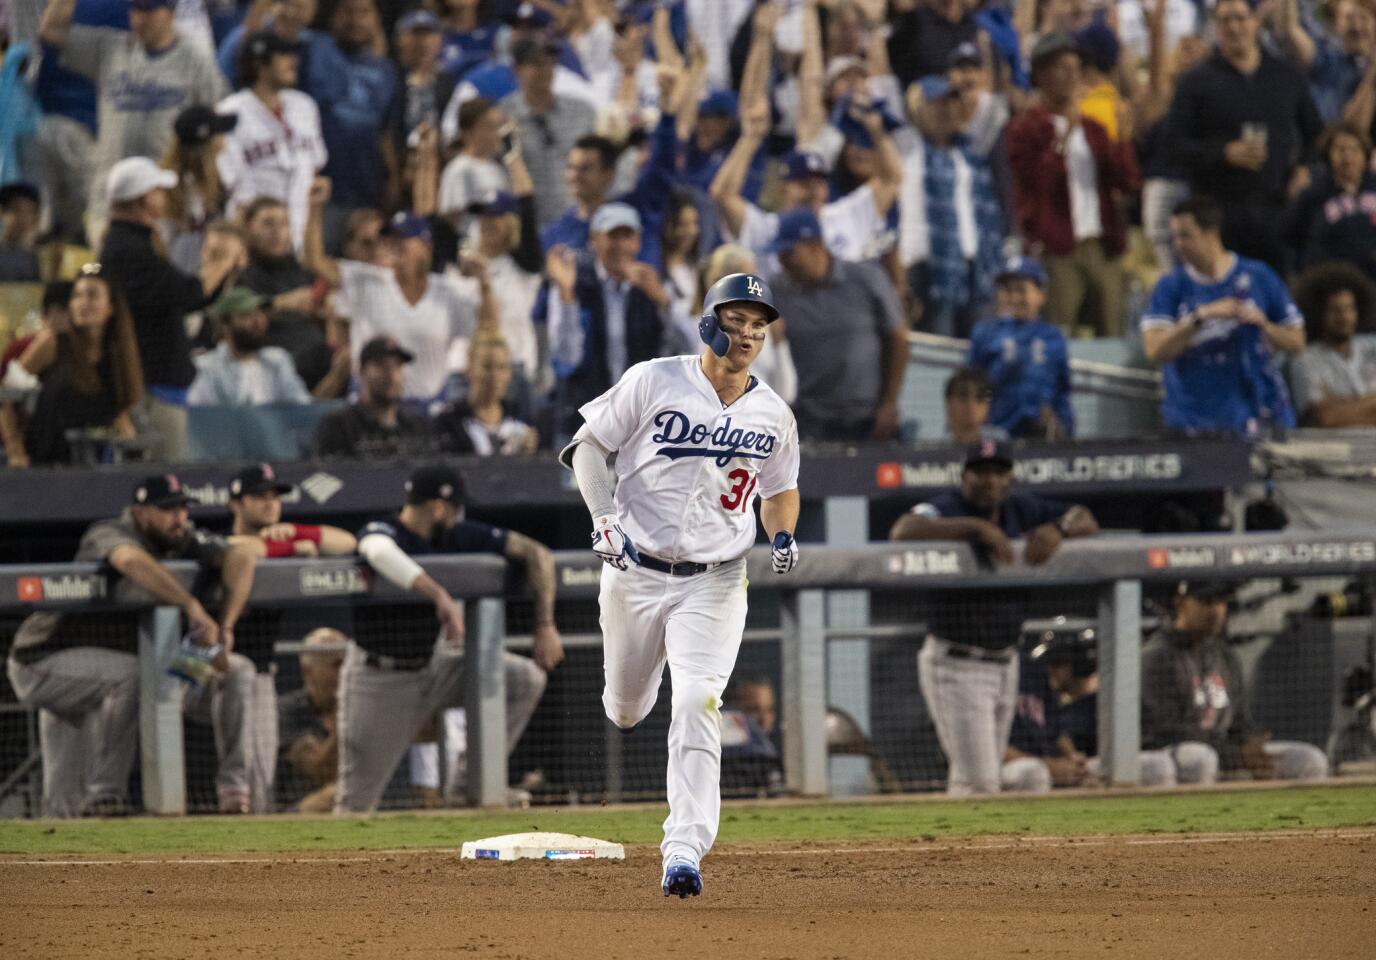 Dodgers left fielder Joc Pederson runs the bases after hitting a solo homer giving the Dodgers a 1-0 lead against the Red Sox in the third inning.